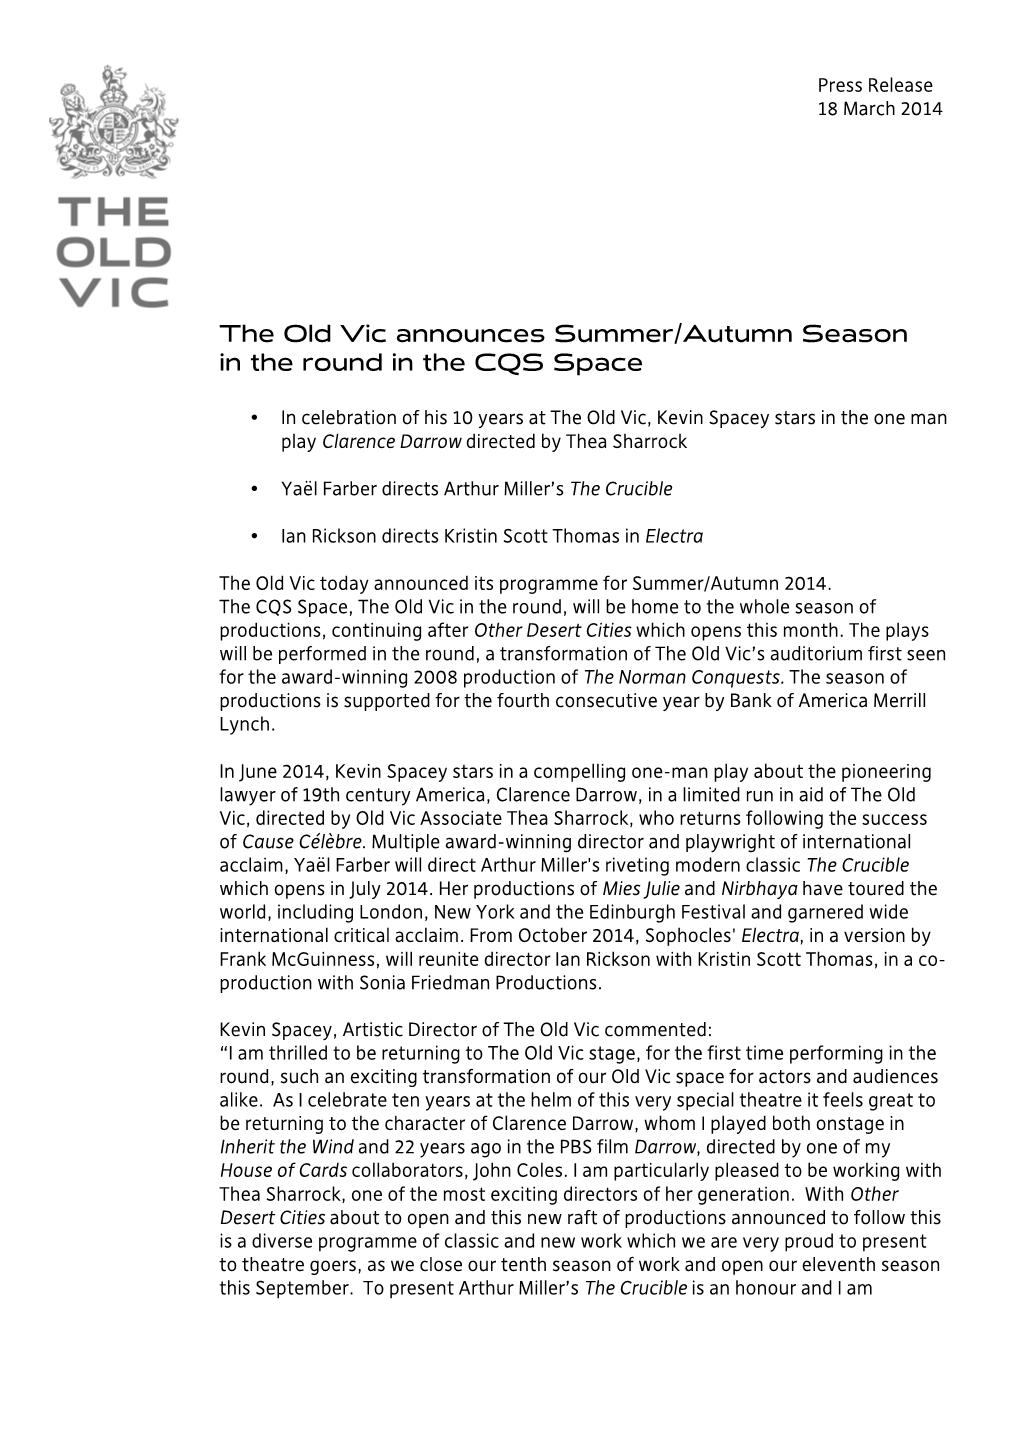 The Old Vic Announces Summer/Autumn Season in the Round in the CQS Space